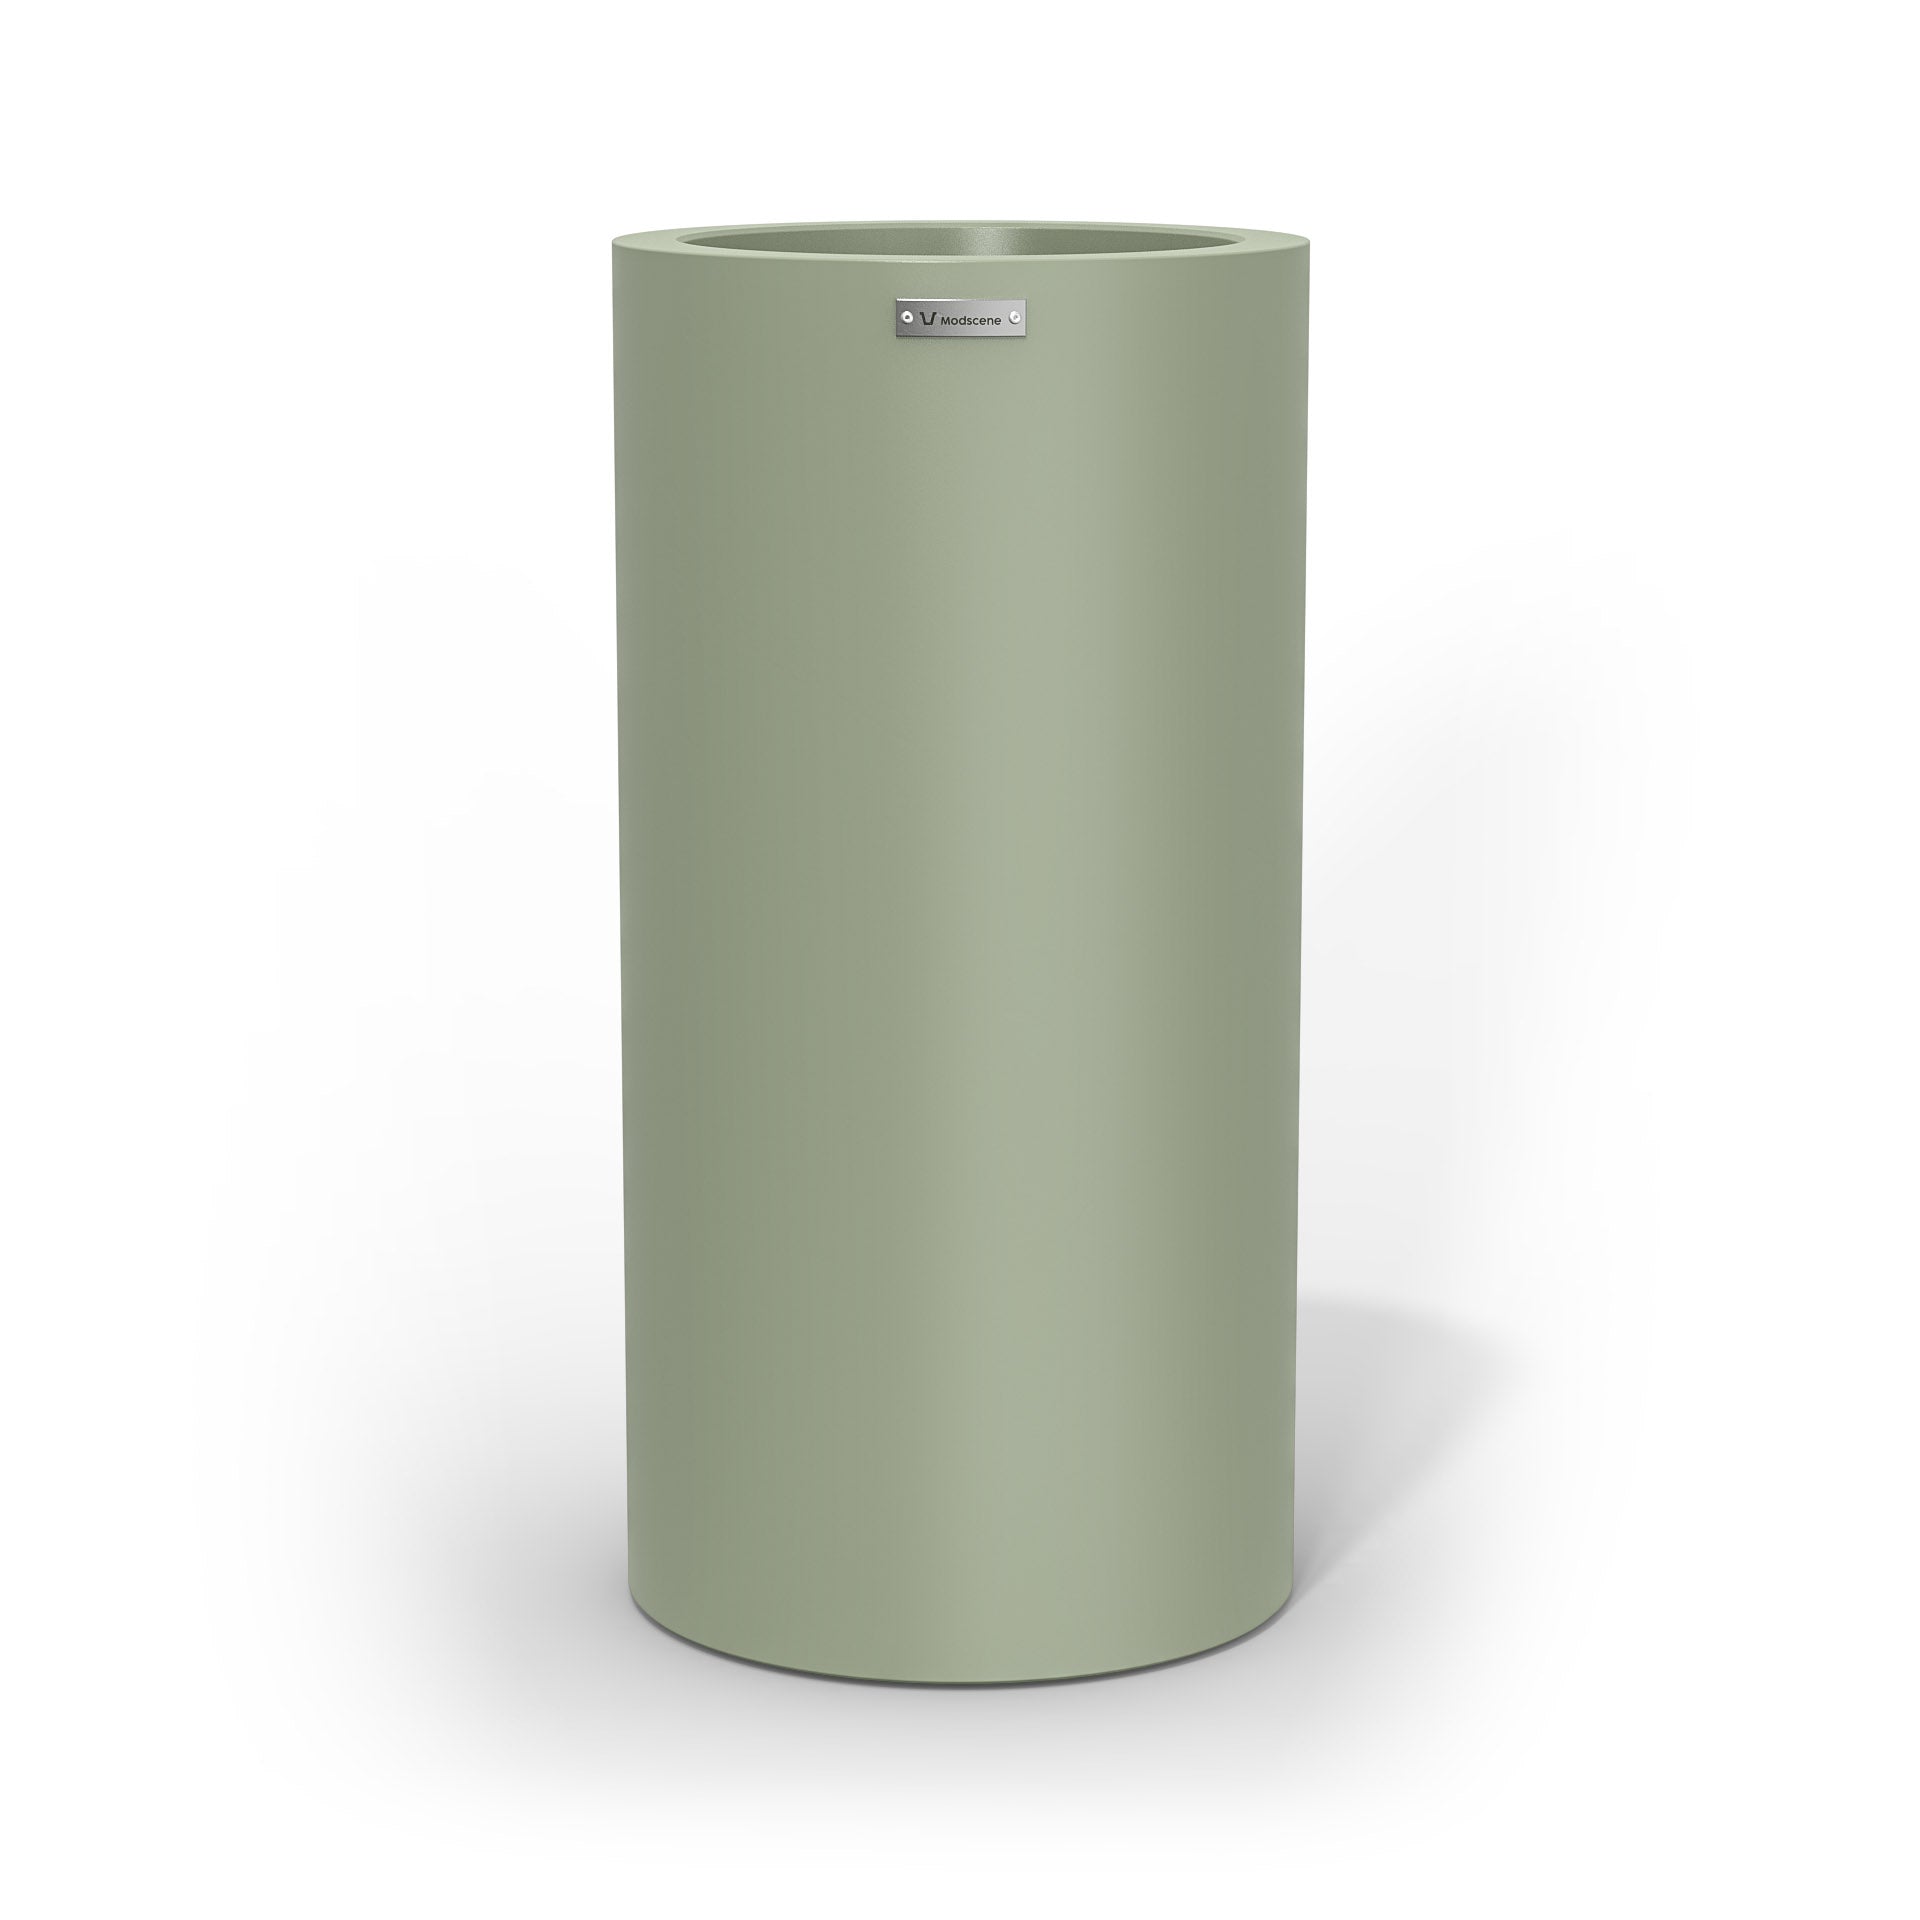 A tall cigar cylinder planter pot in a moss green colour made by Modscene.